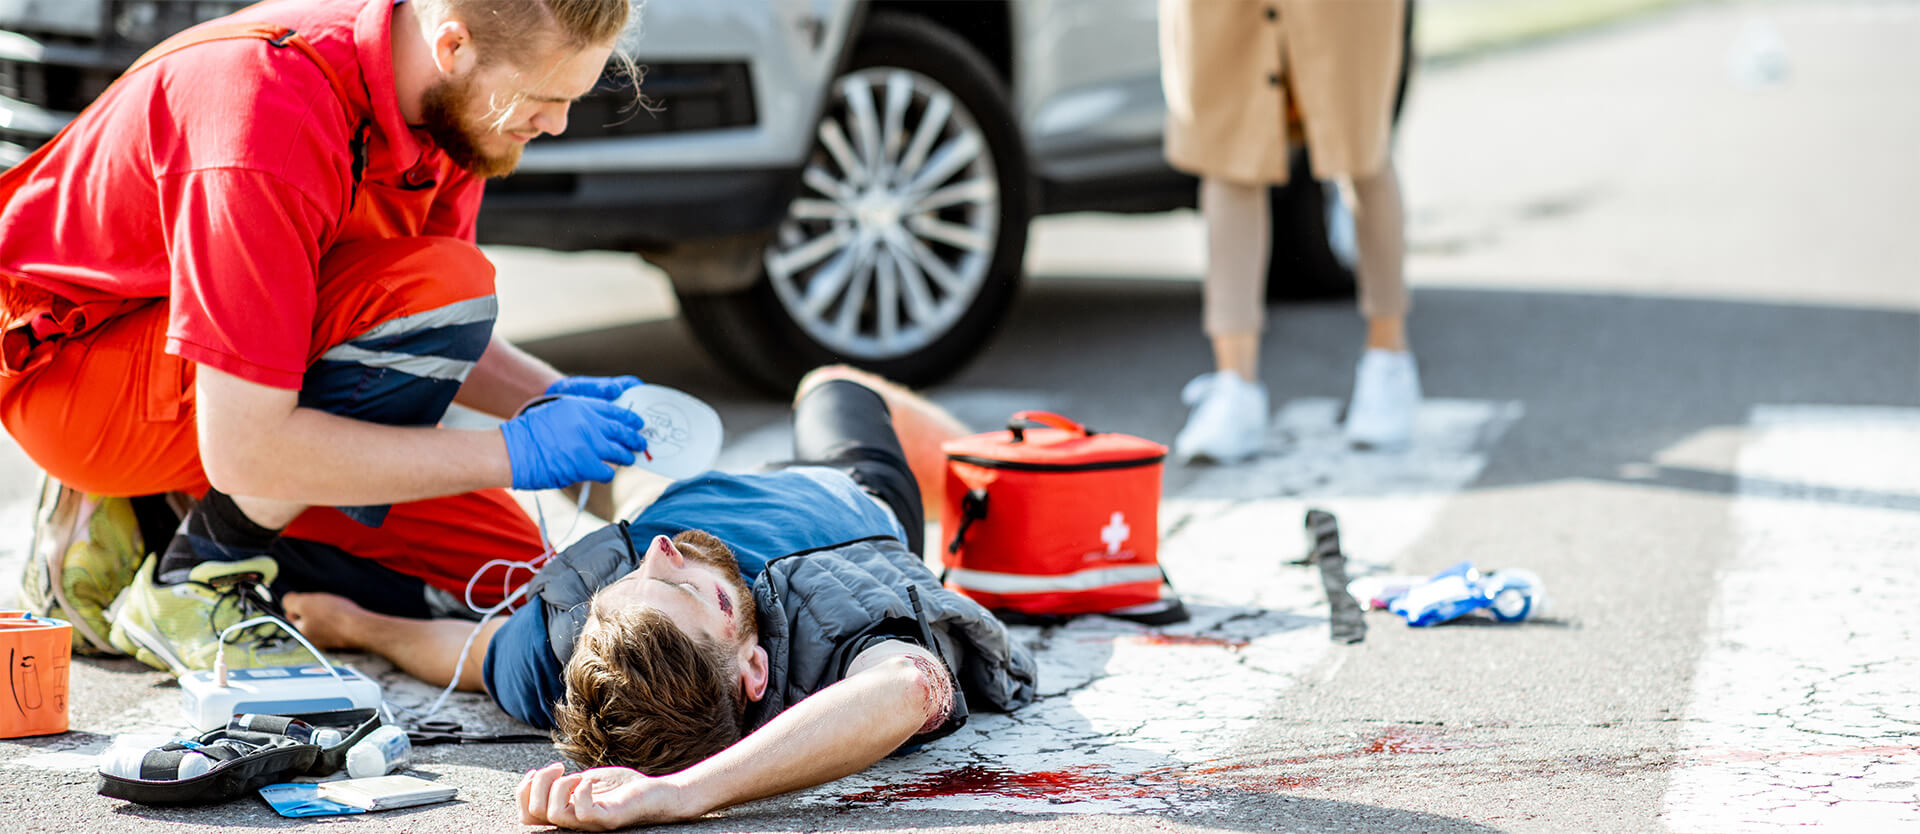 a pedestrian injured on the road